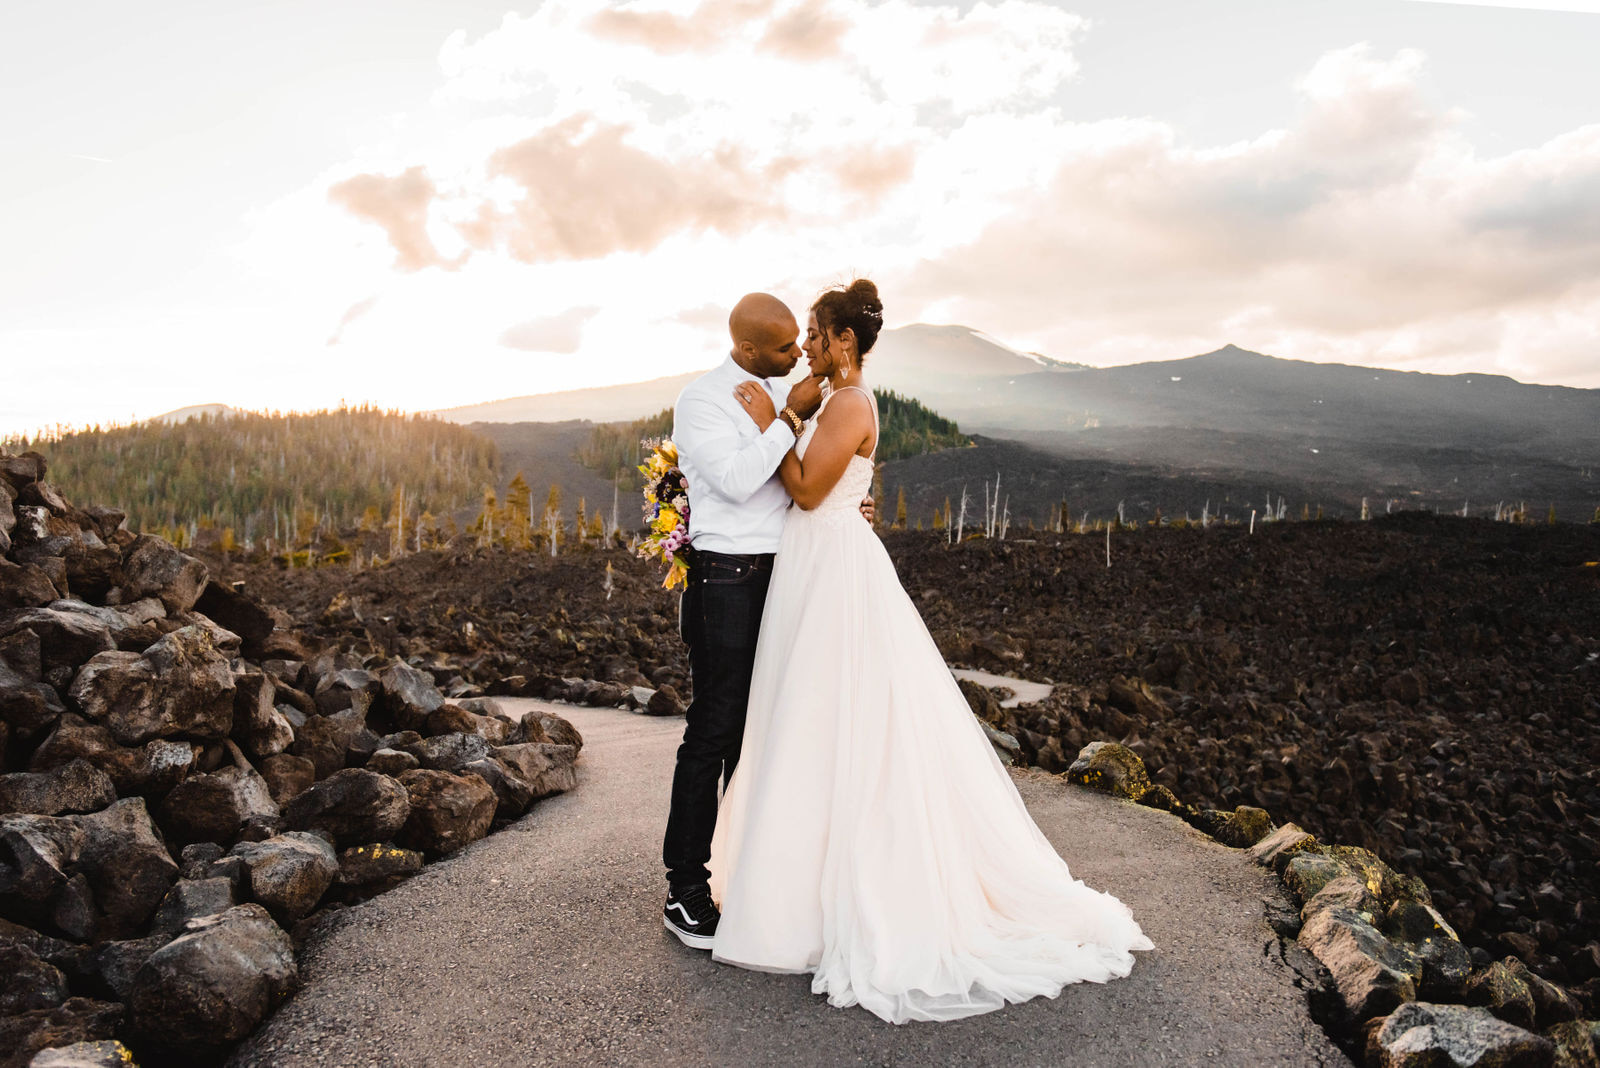 A couple who eloped at the Lava beds outside of Sisters, Oregon on the McKenzie Pass National Scenic Byway at sunset